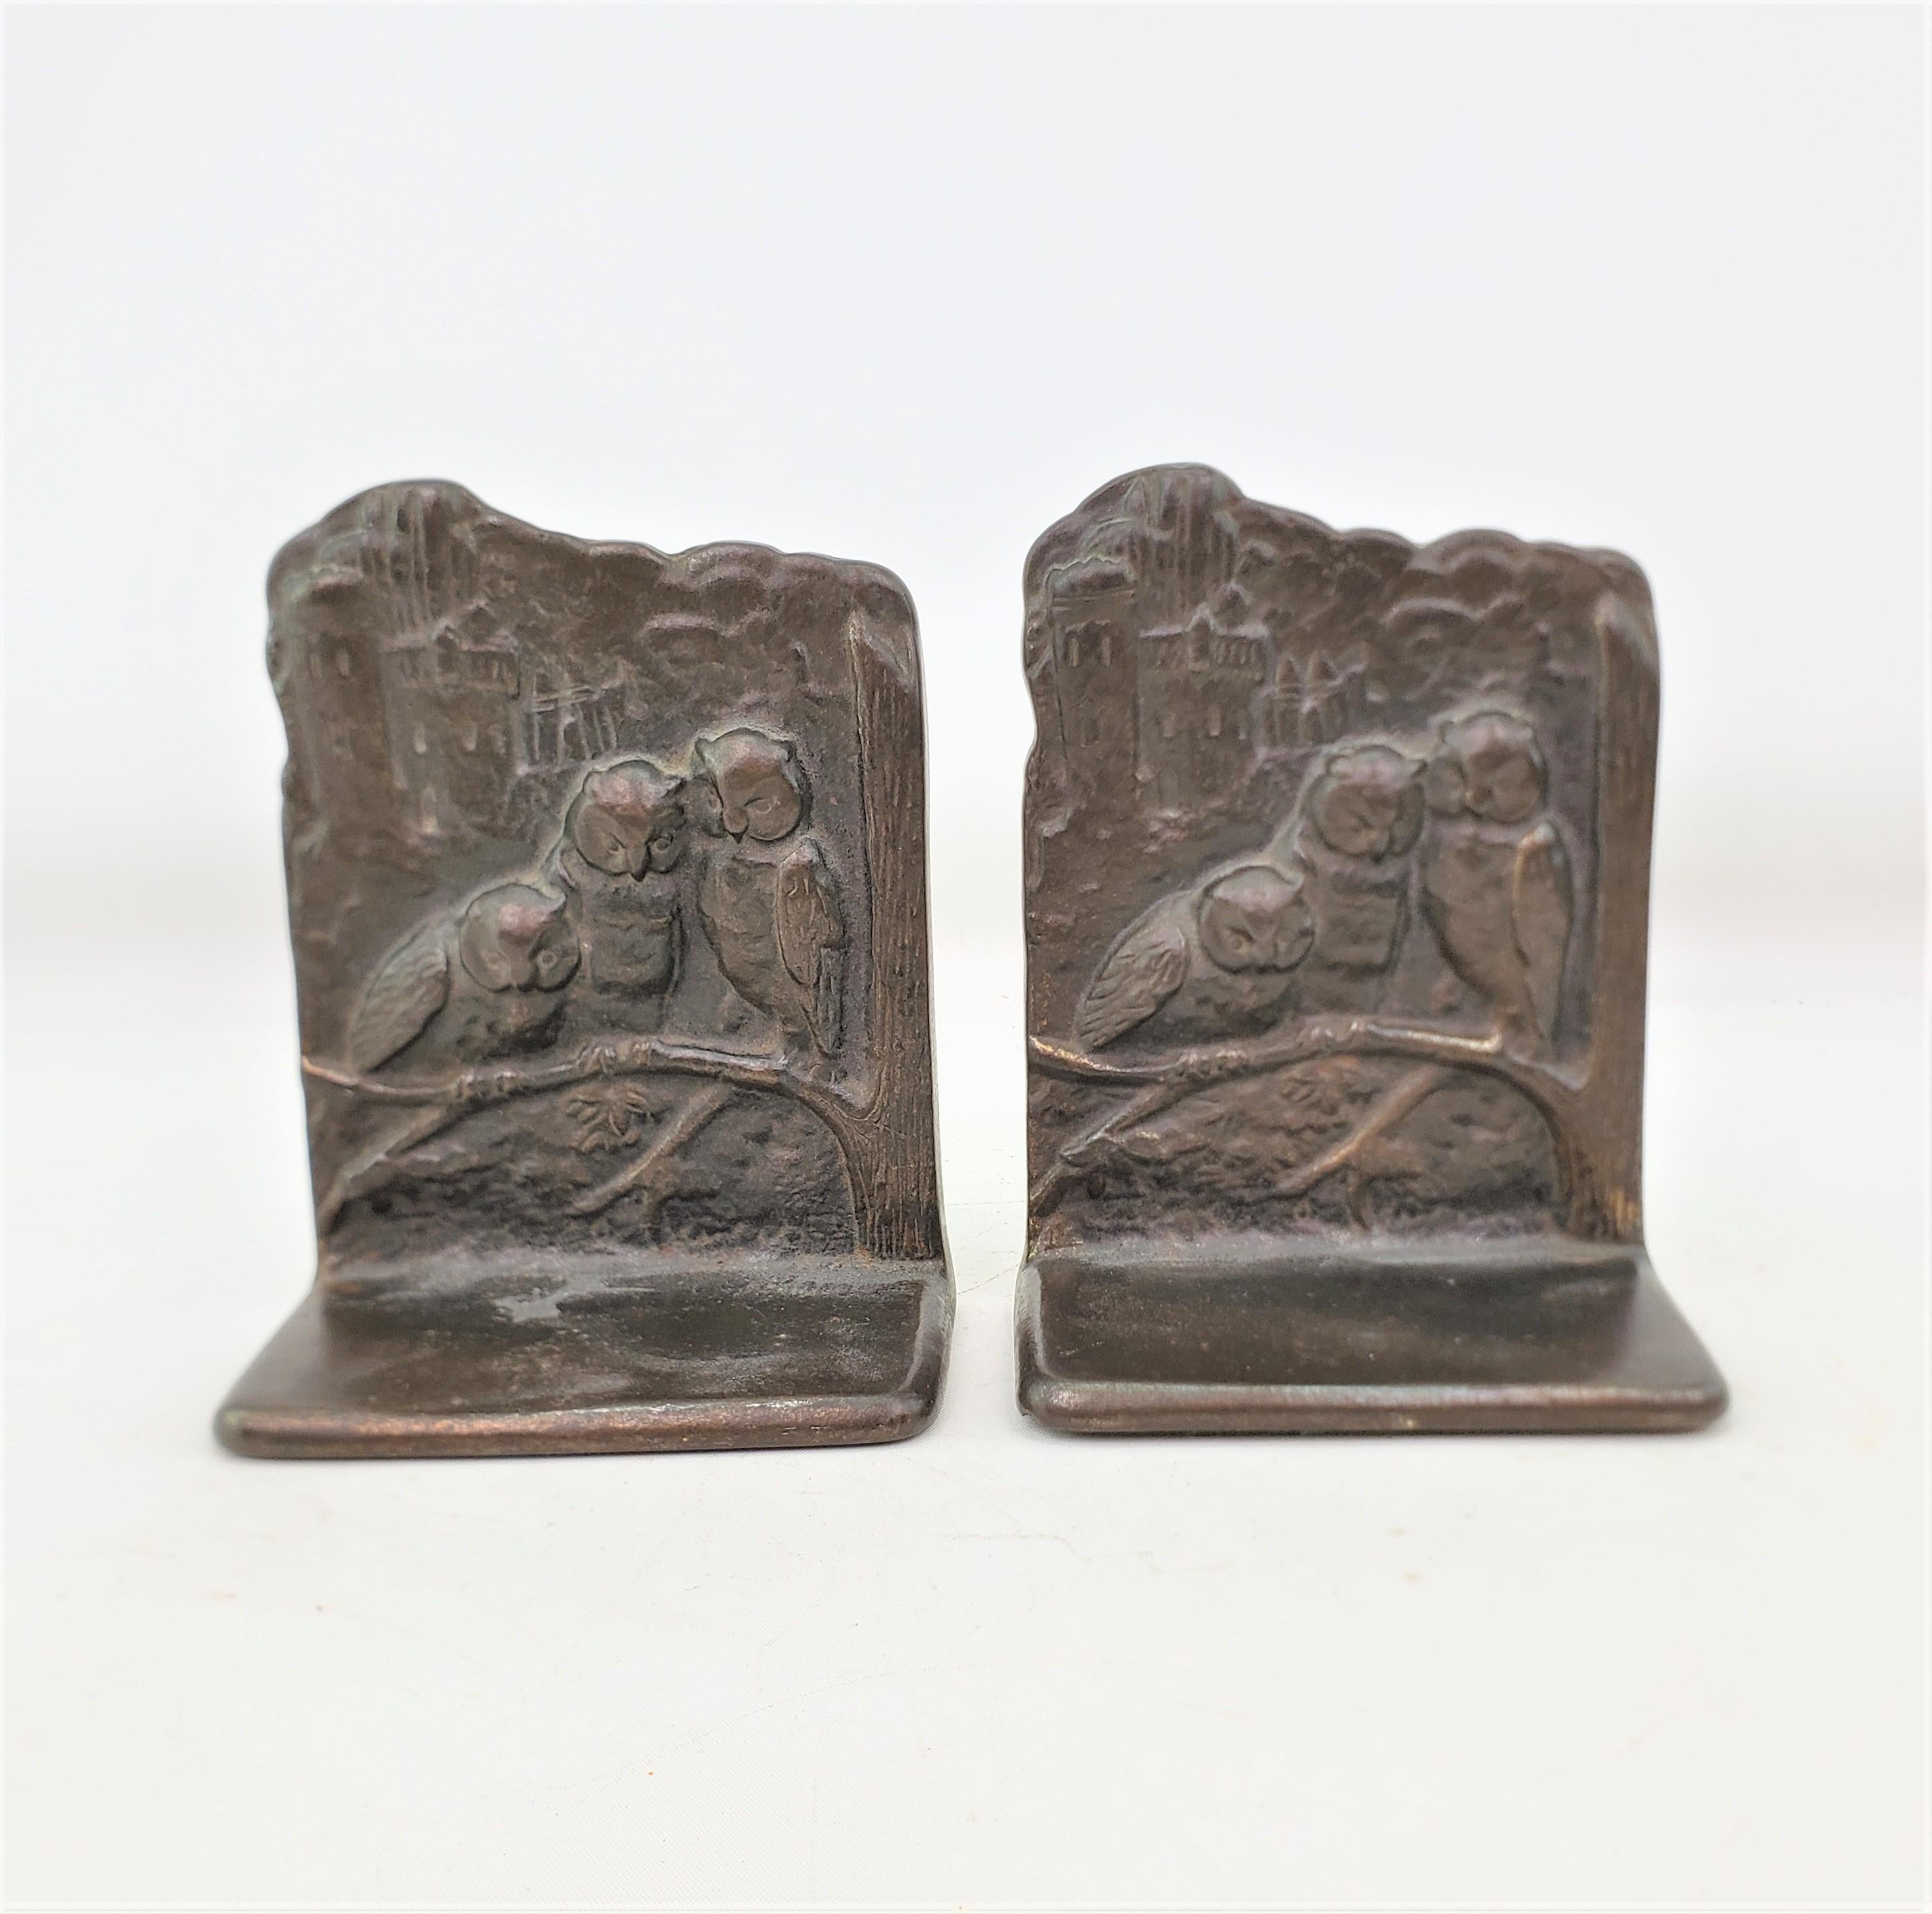 This pair of antique bookends are unsigned, but presumed to have originated from the United States and date to approximately 1920 and done in the period Art Deco style. The bookends are composed of cast steel with a bronze patination and depict